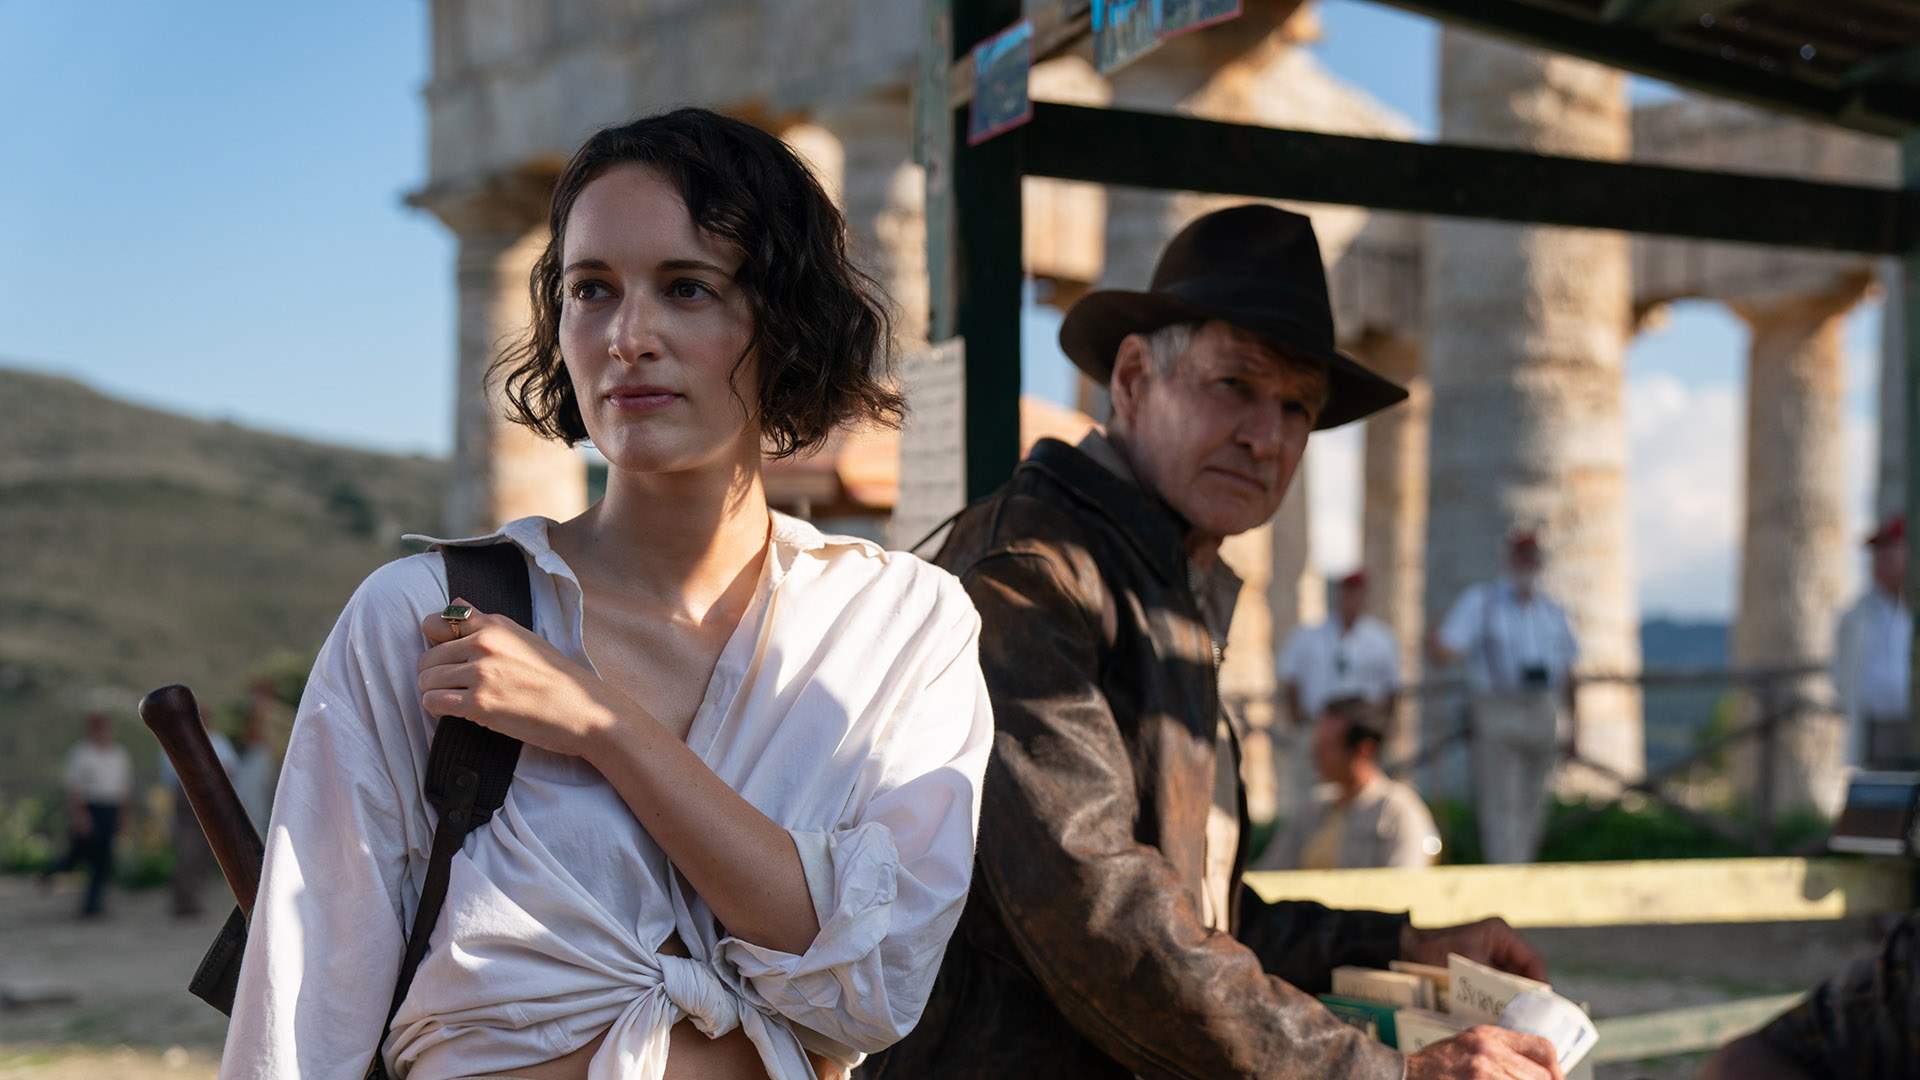 Harrison Ford and Phoebe Waller-Bridge Make a Bantering Pair in the Full 'Indiana Jones 5' Trailer